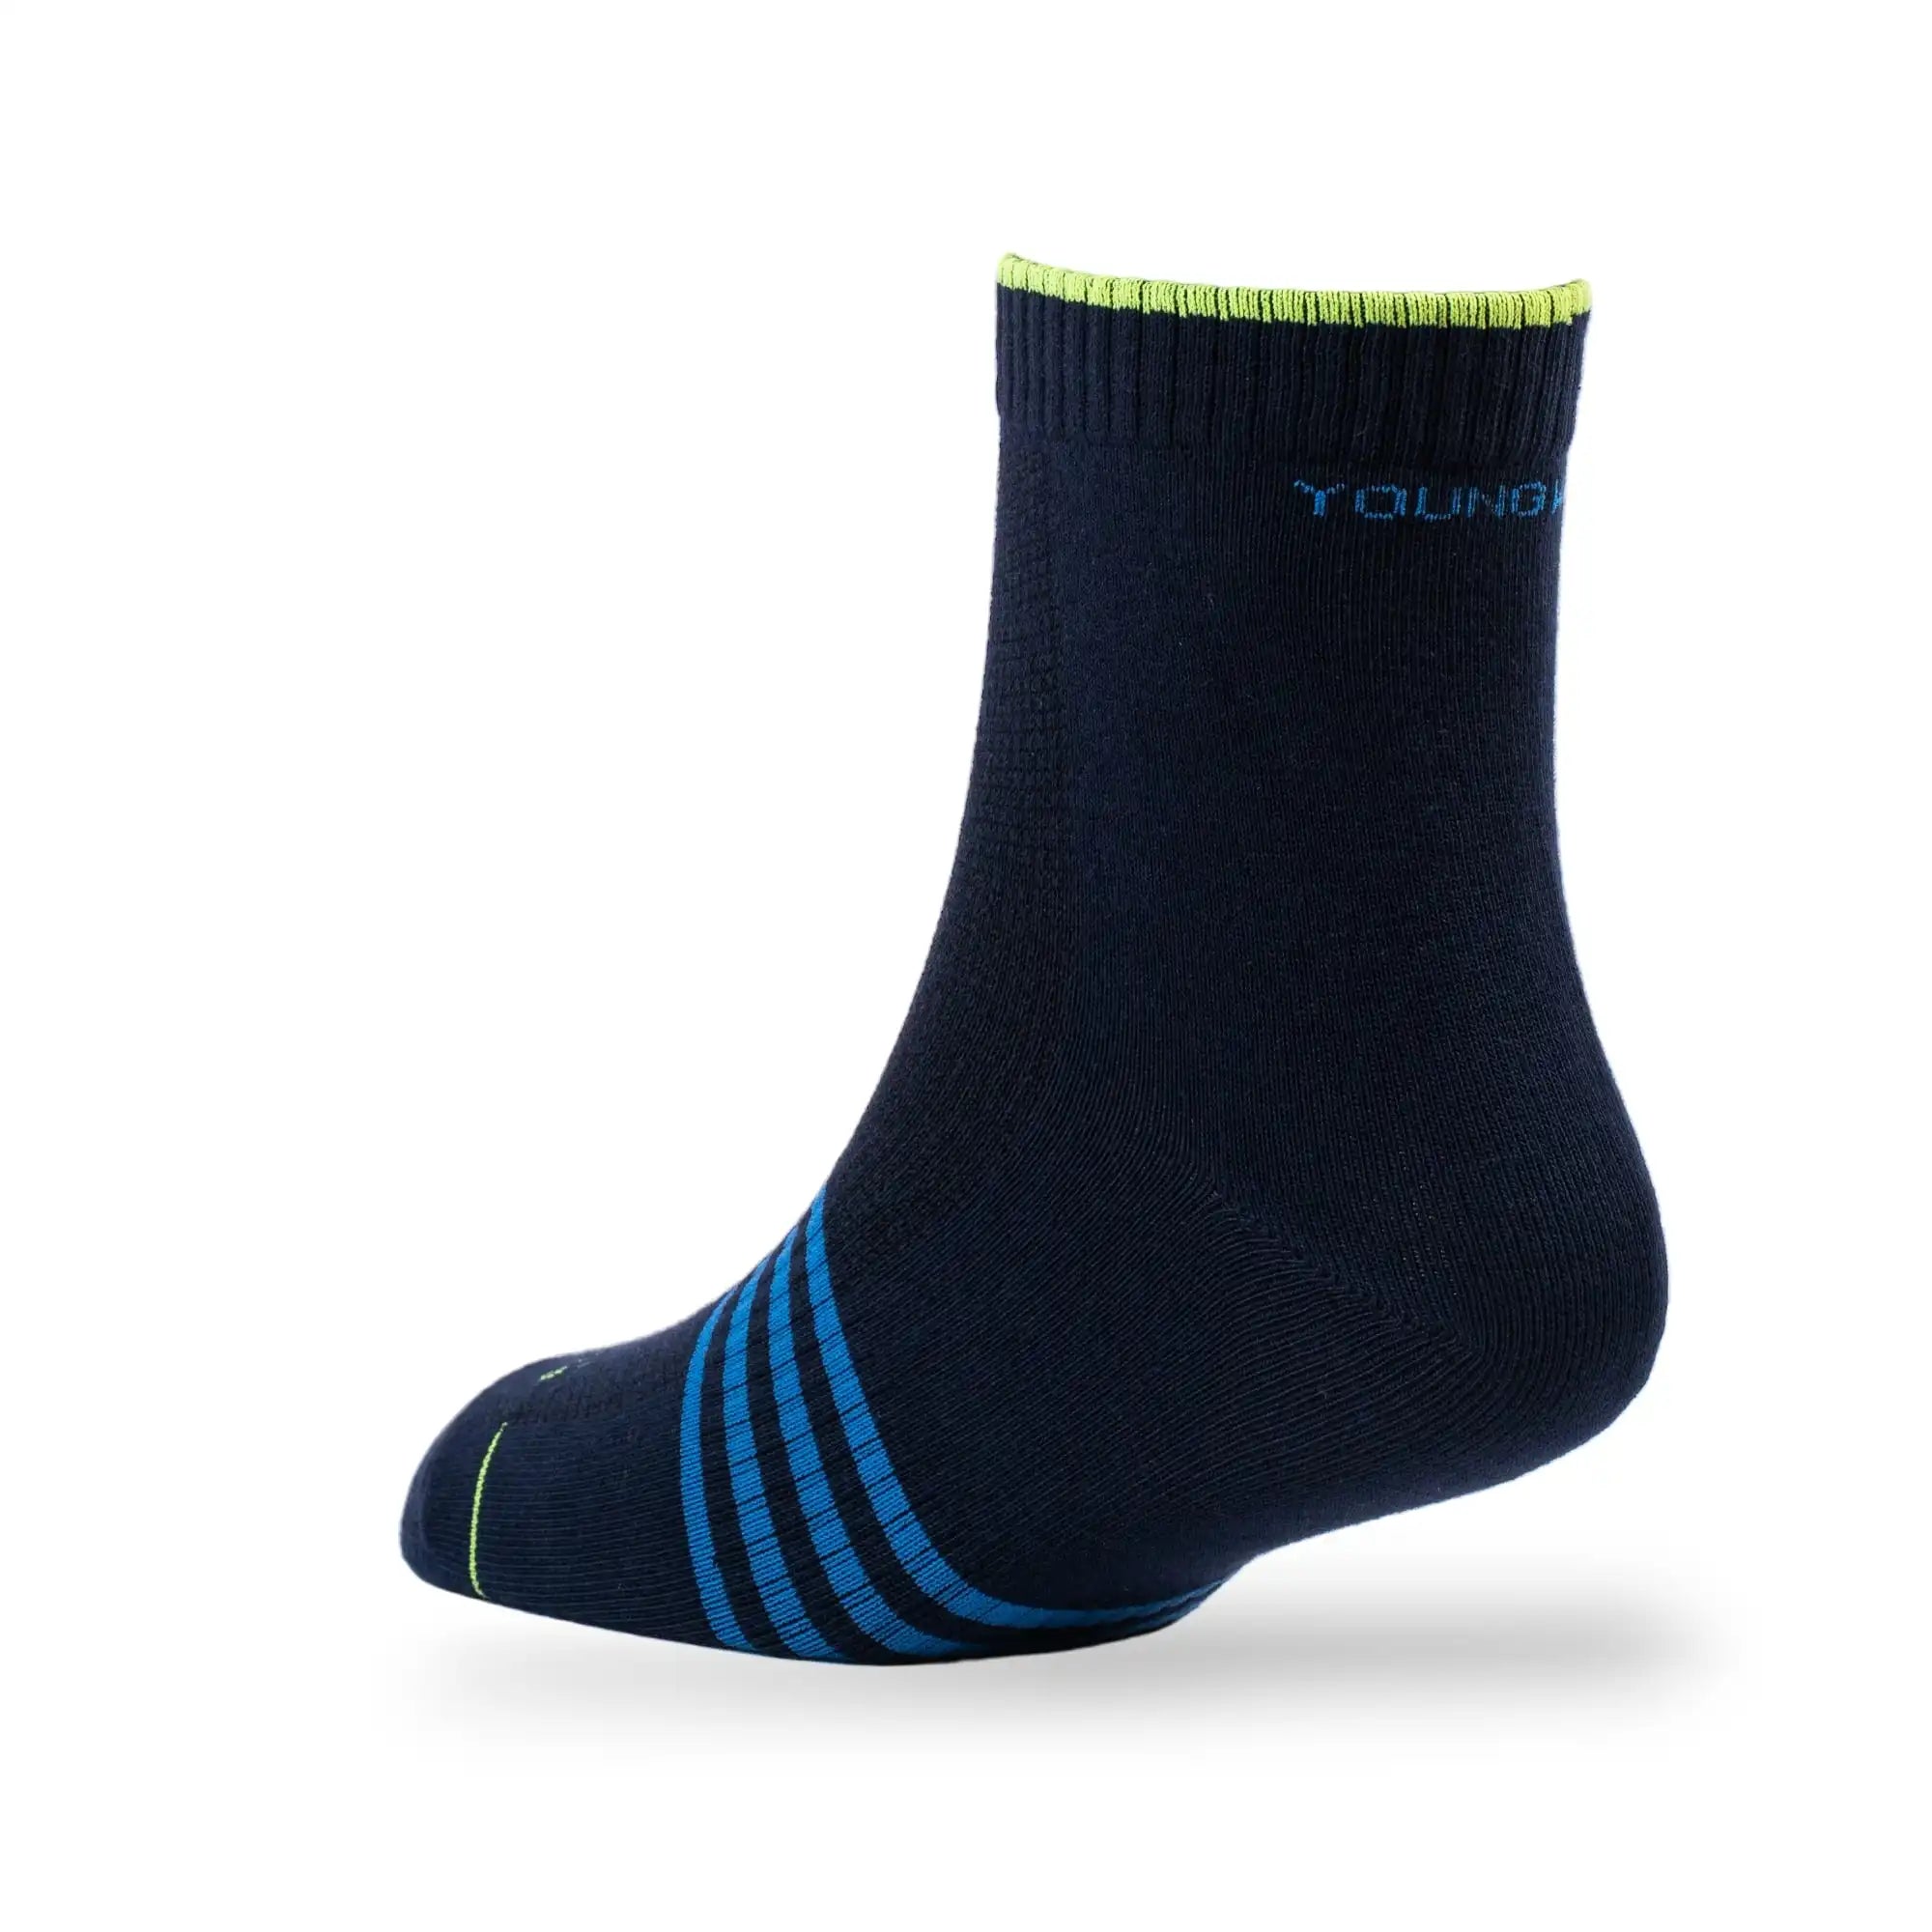 Young Wings Men's Multi Colour Cotton Fabric Design Ankle Length Socks - Pack of 5, Style no. M1-2110 N